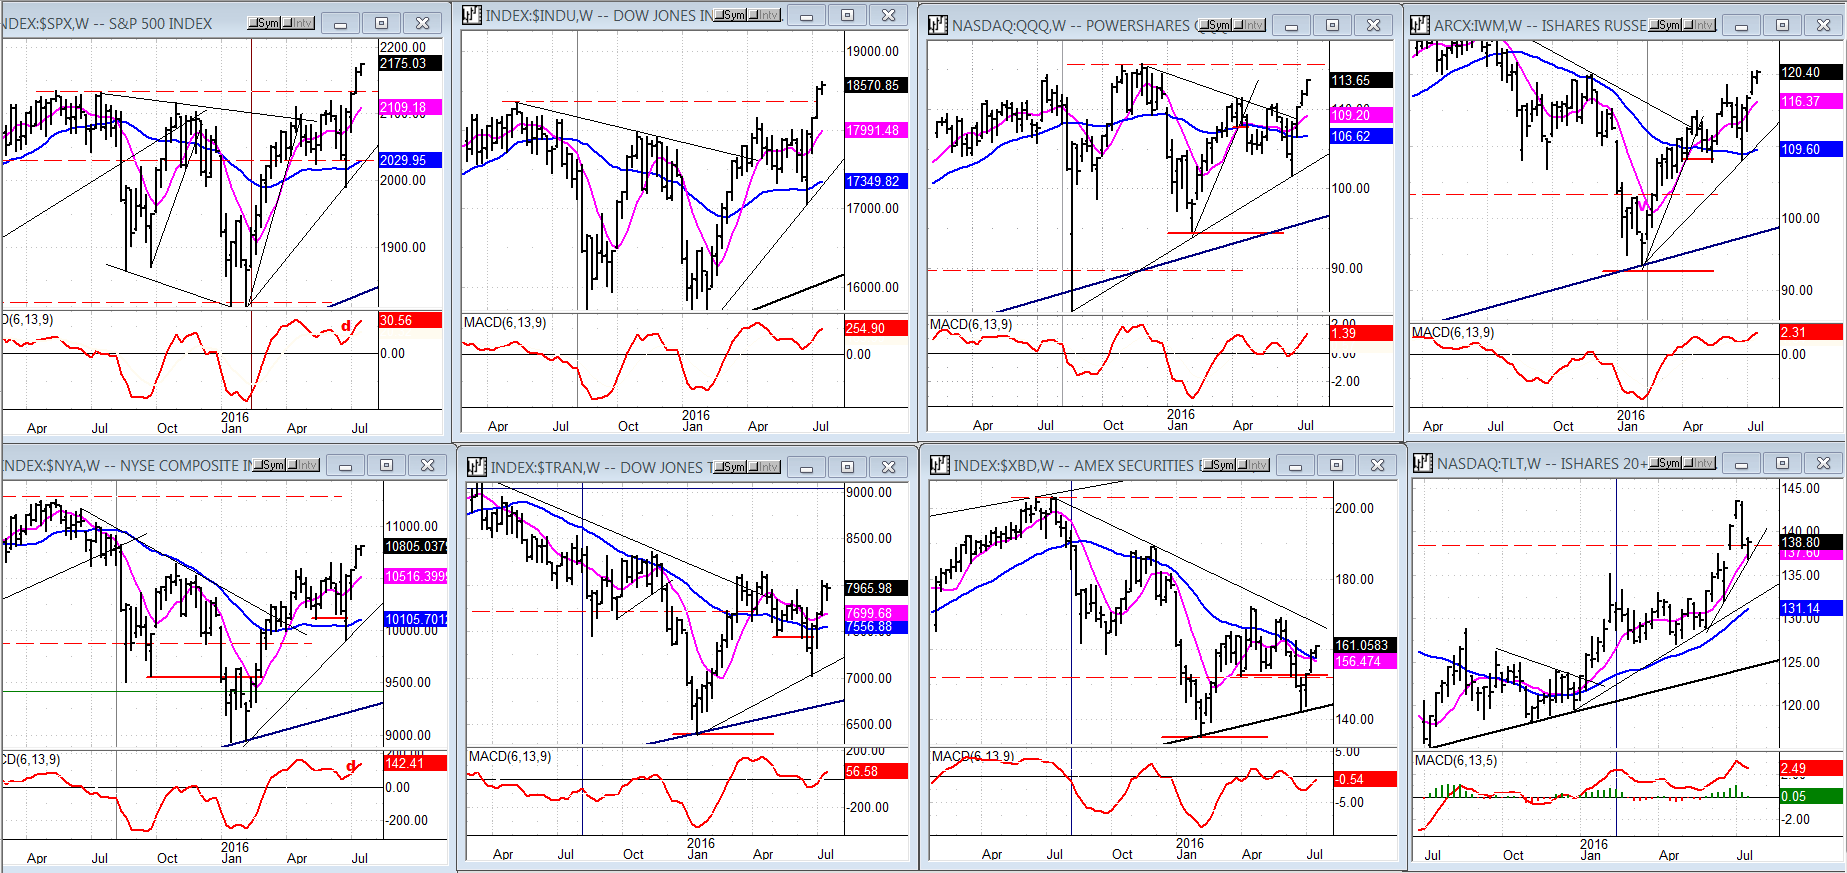 Some Leading & Confirming Indexes (Weekly)